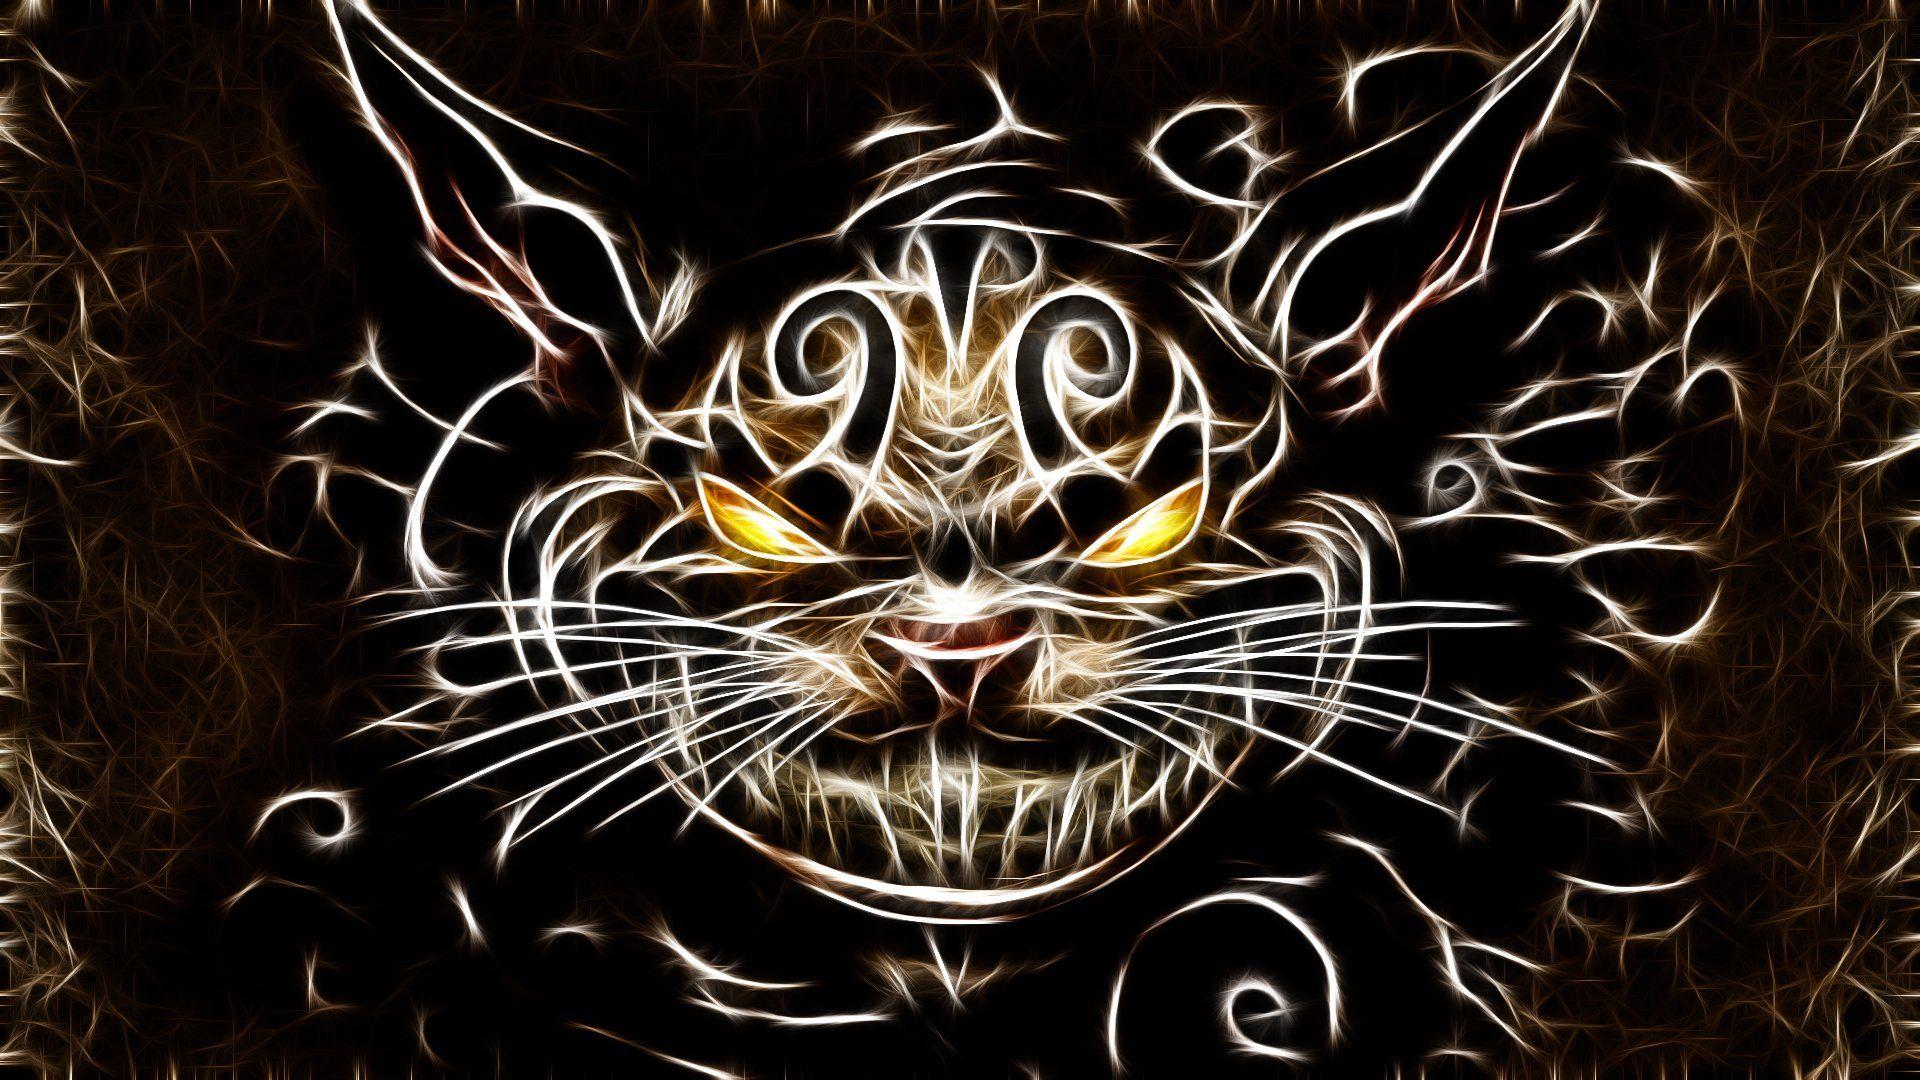 cheshire cat wallpaper iphone 5 re all mad here